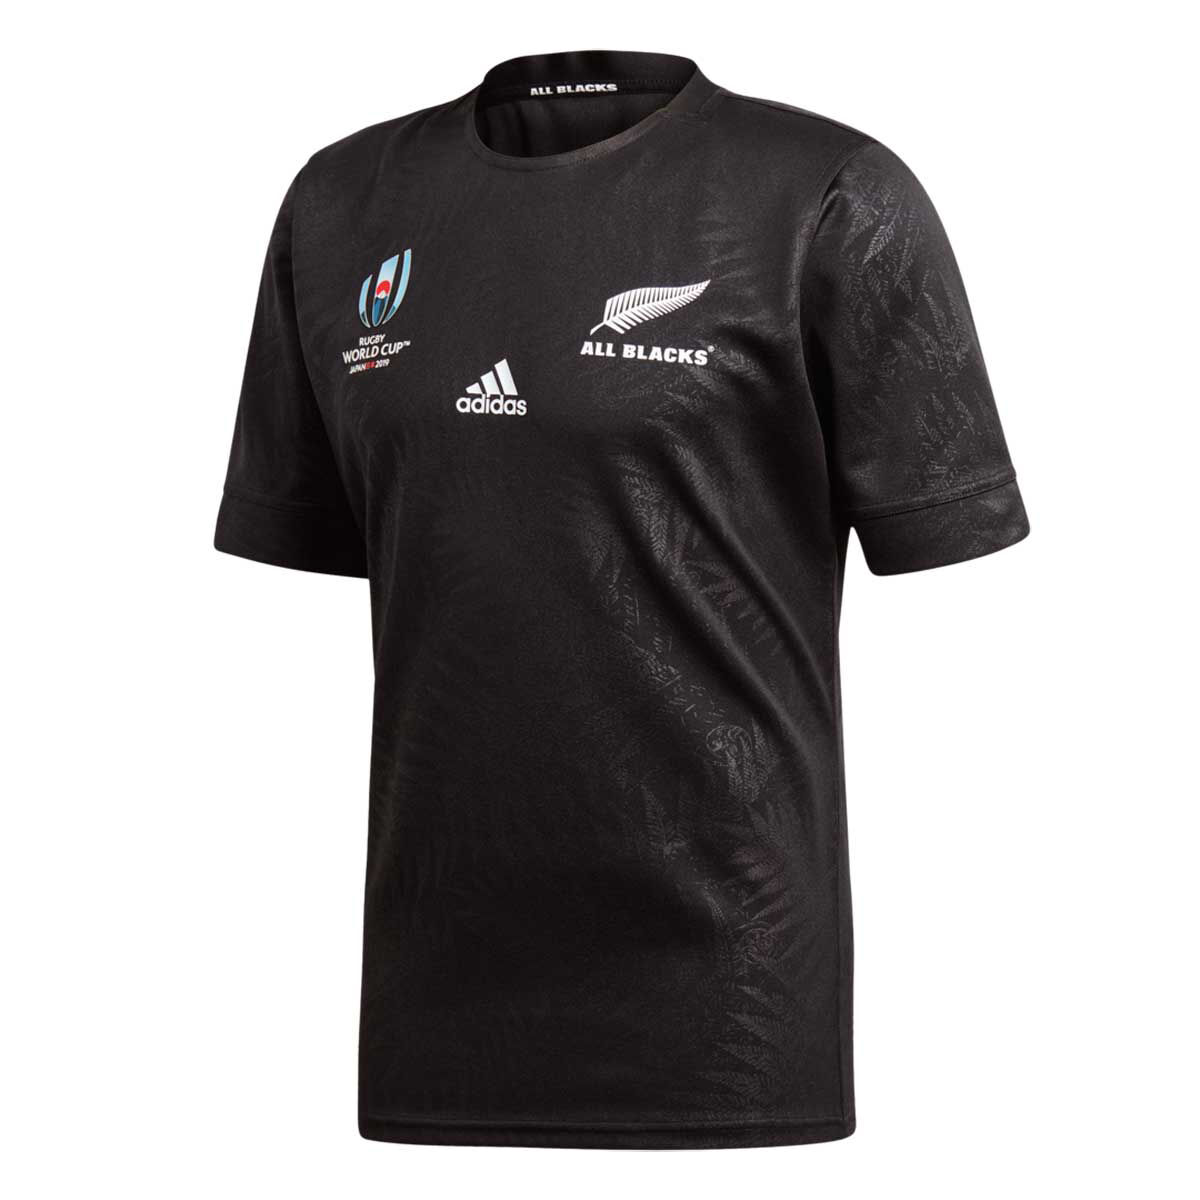 wc jersey 2019